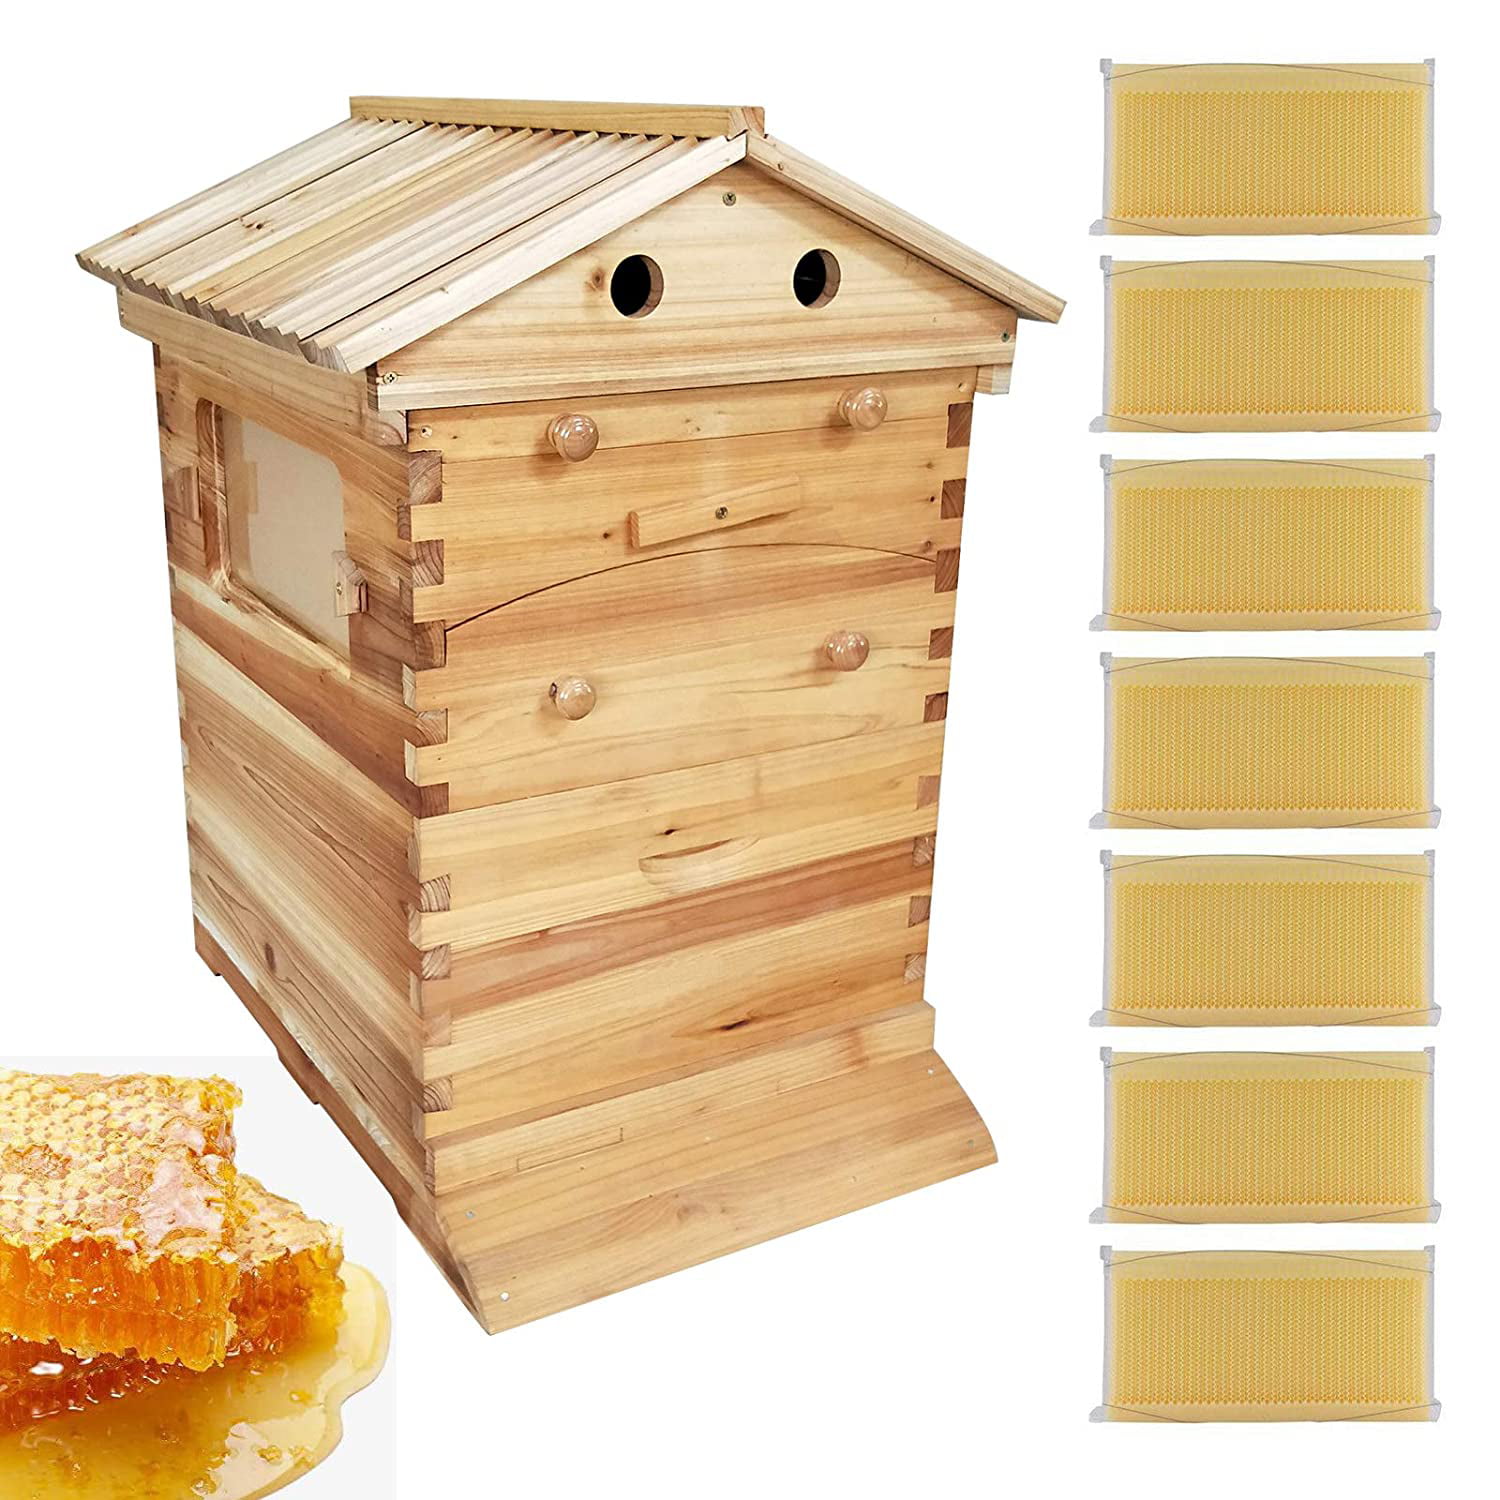 Details about   7PCS Auto Run Bee Comb Hive Practical Wooden Beekeeping Beehive House Box NEW 